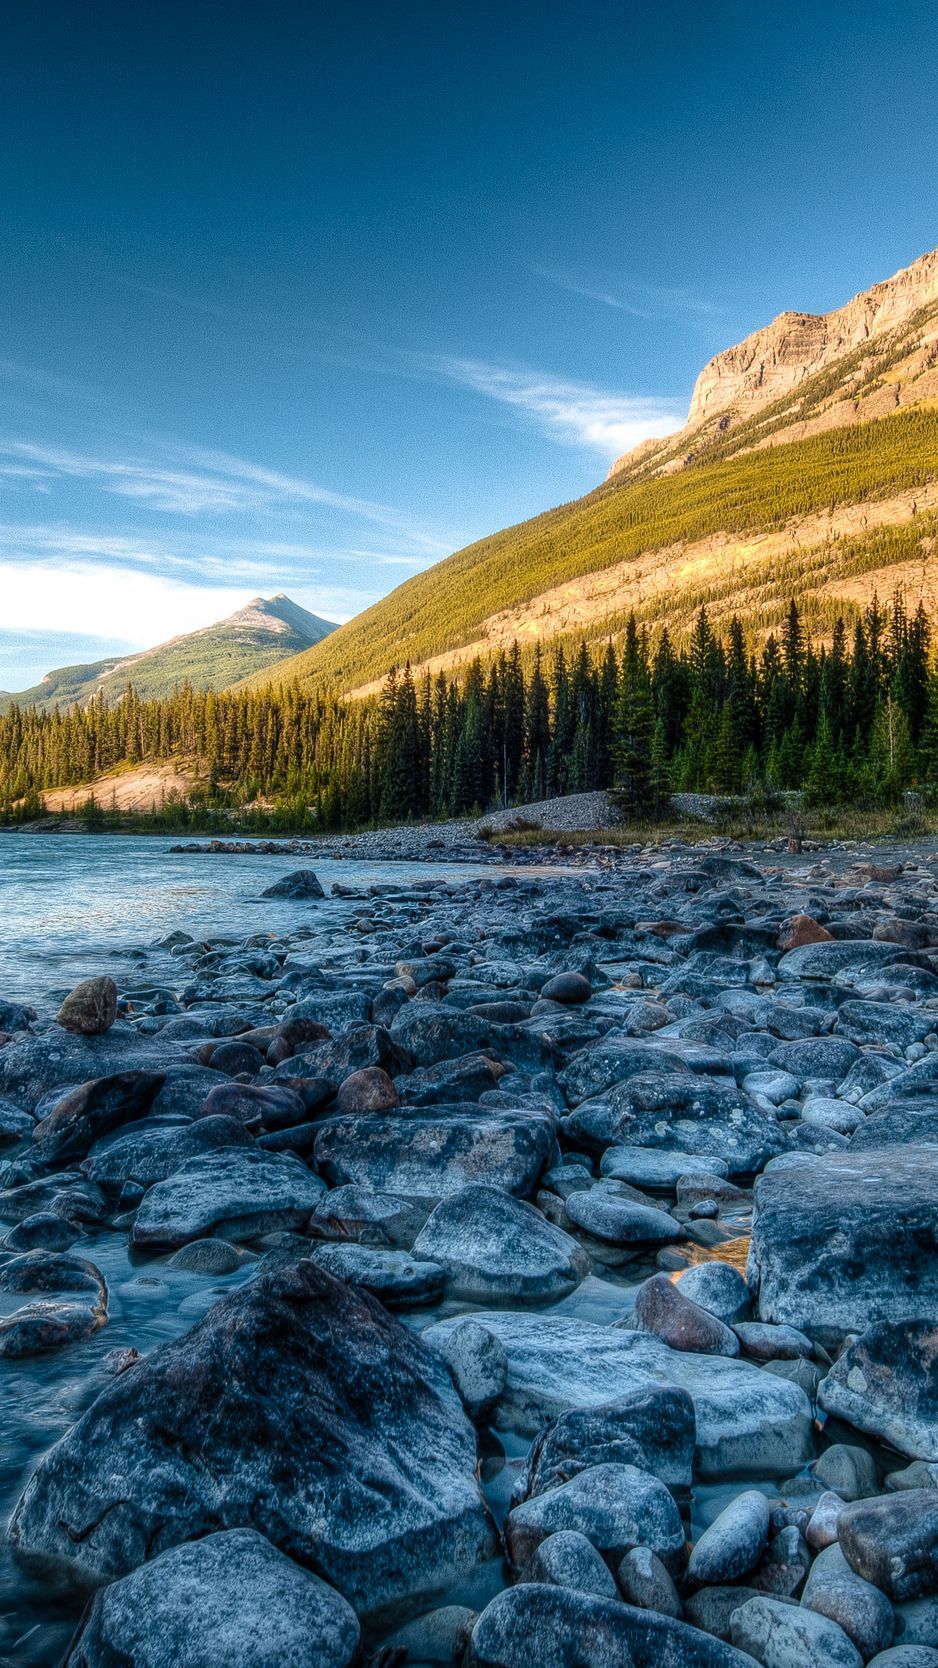 Download wallpaper 938x1668 rocky mountains, river, stones